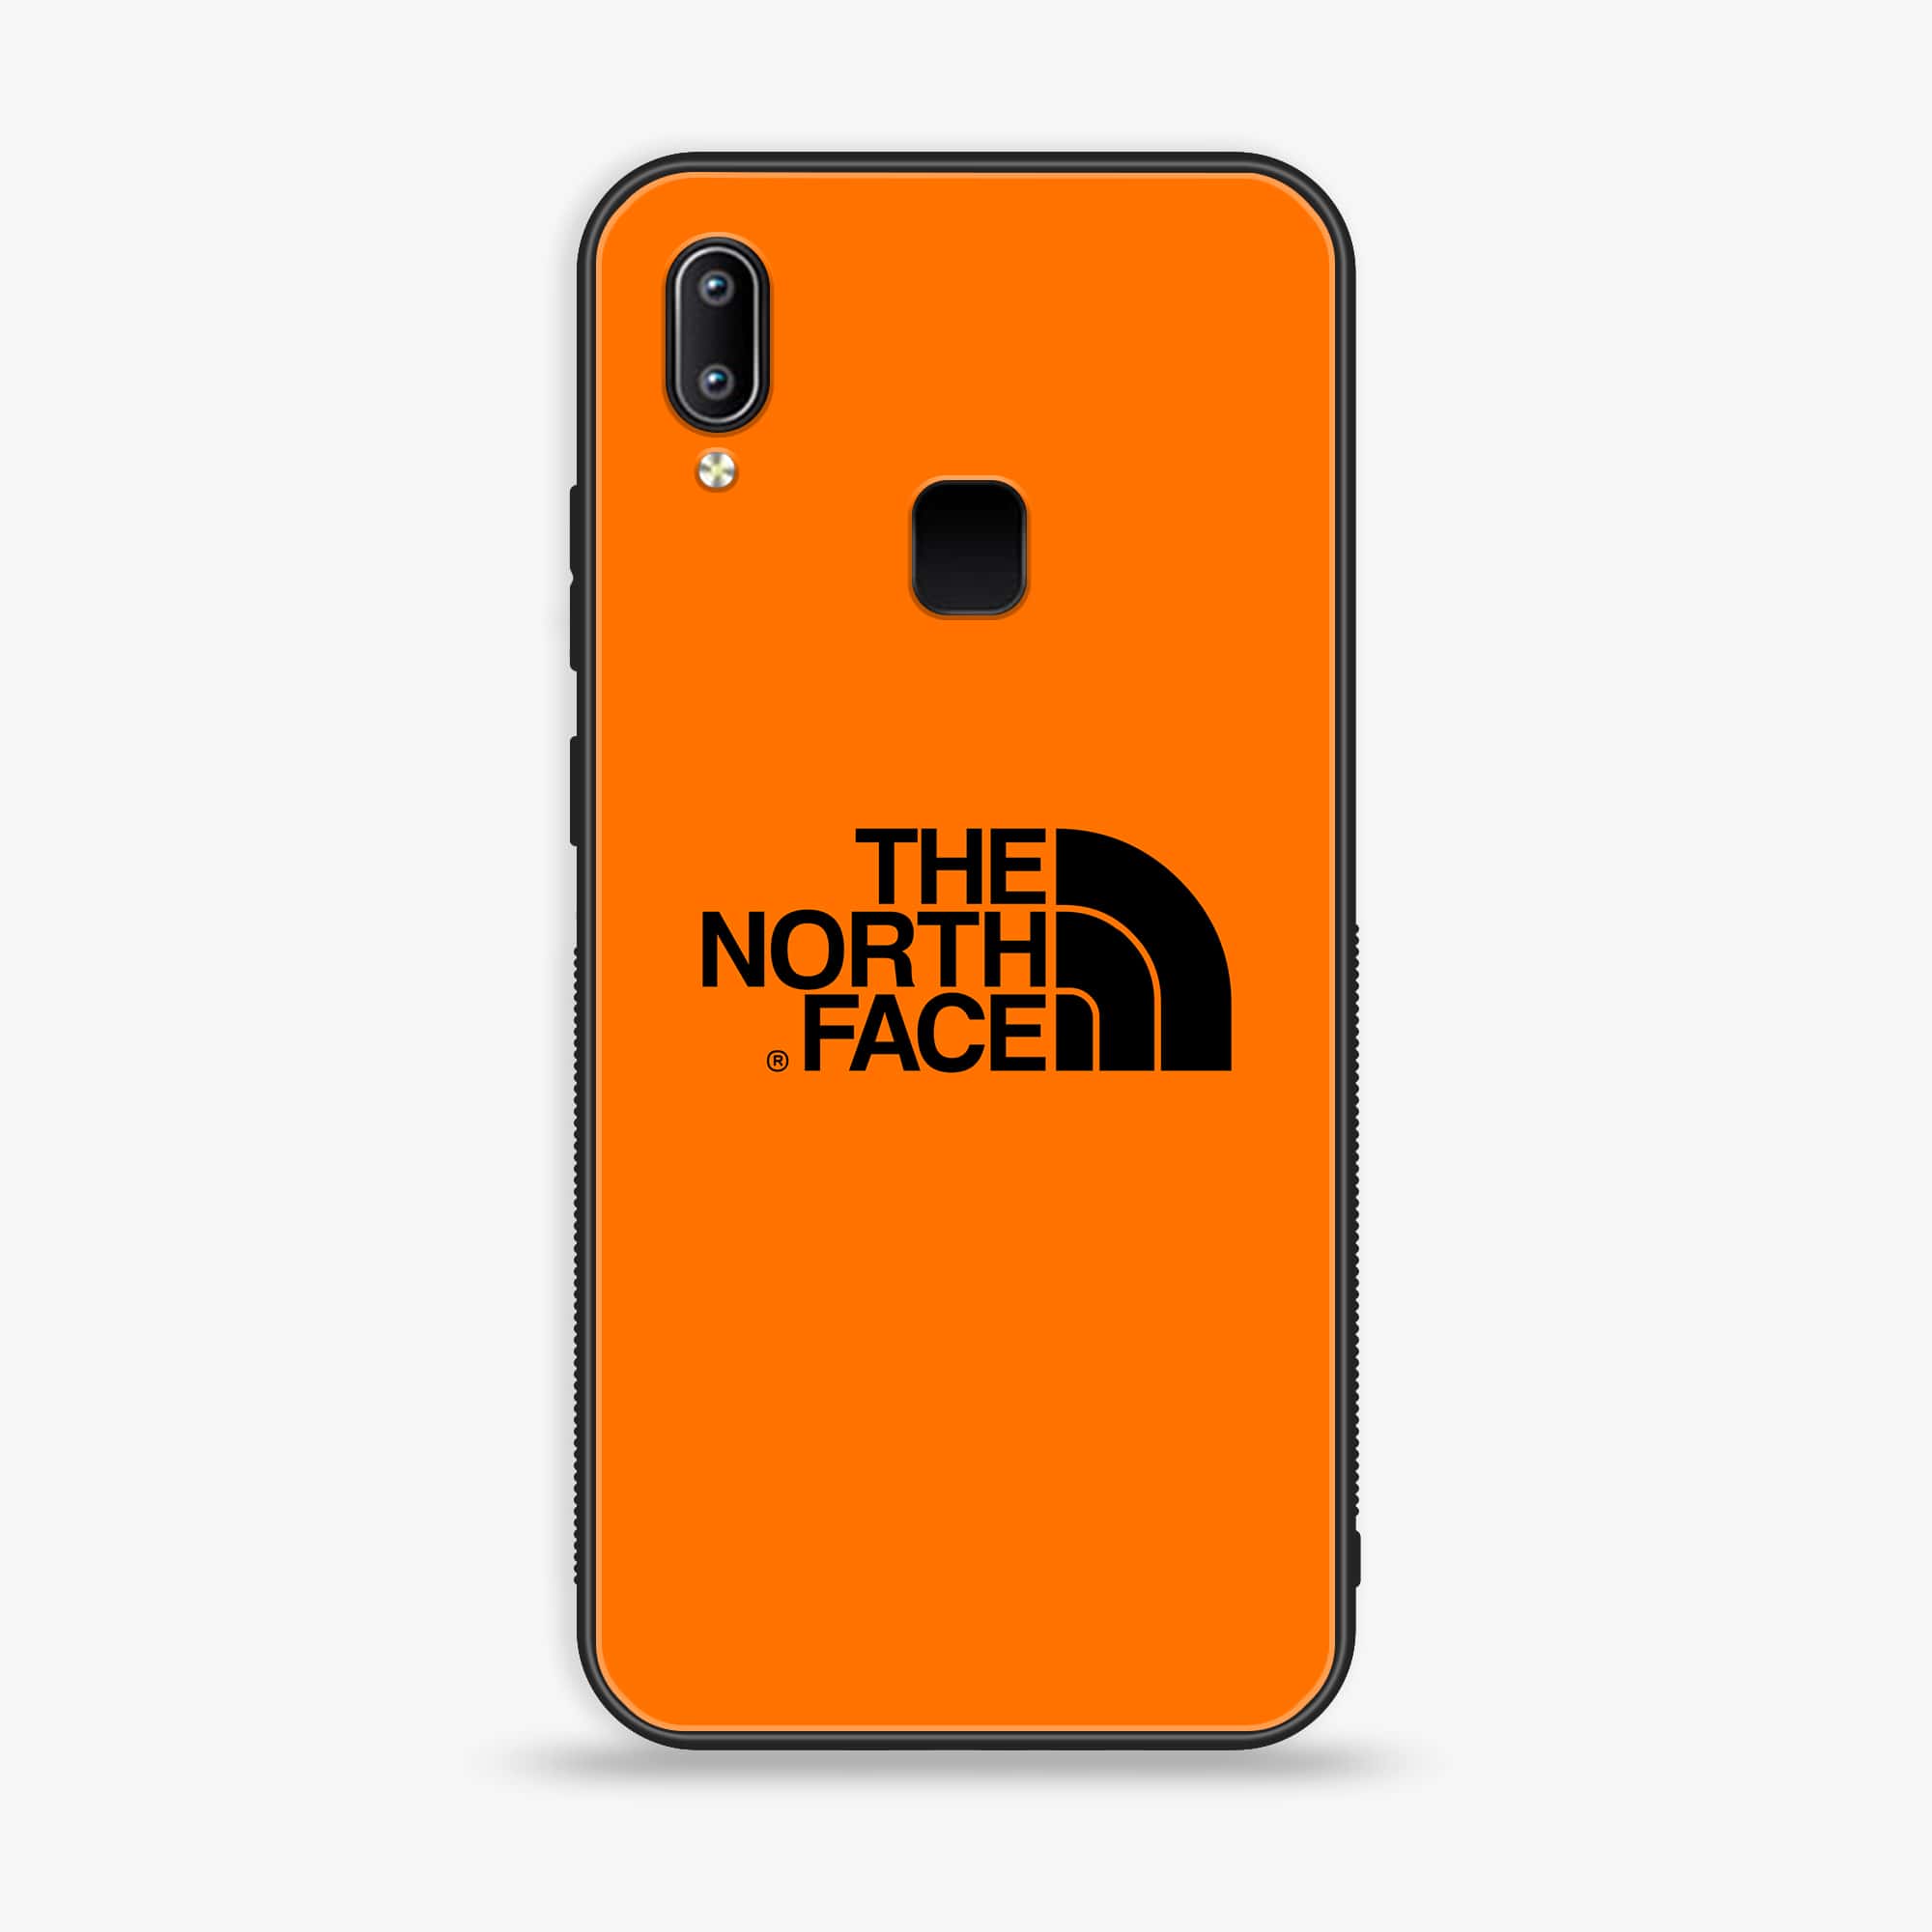 VIVO Y91 - The North Face Series - Premium Printed Glass soft Bumper shock Proof Case